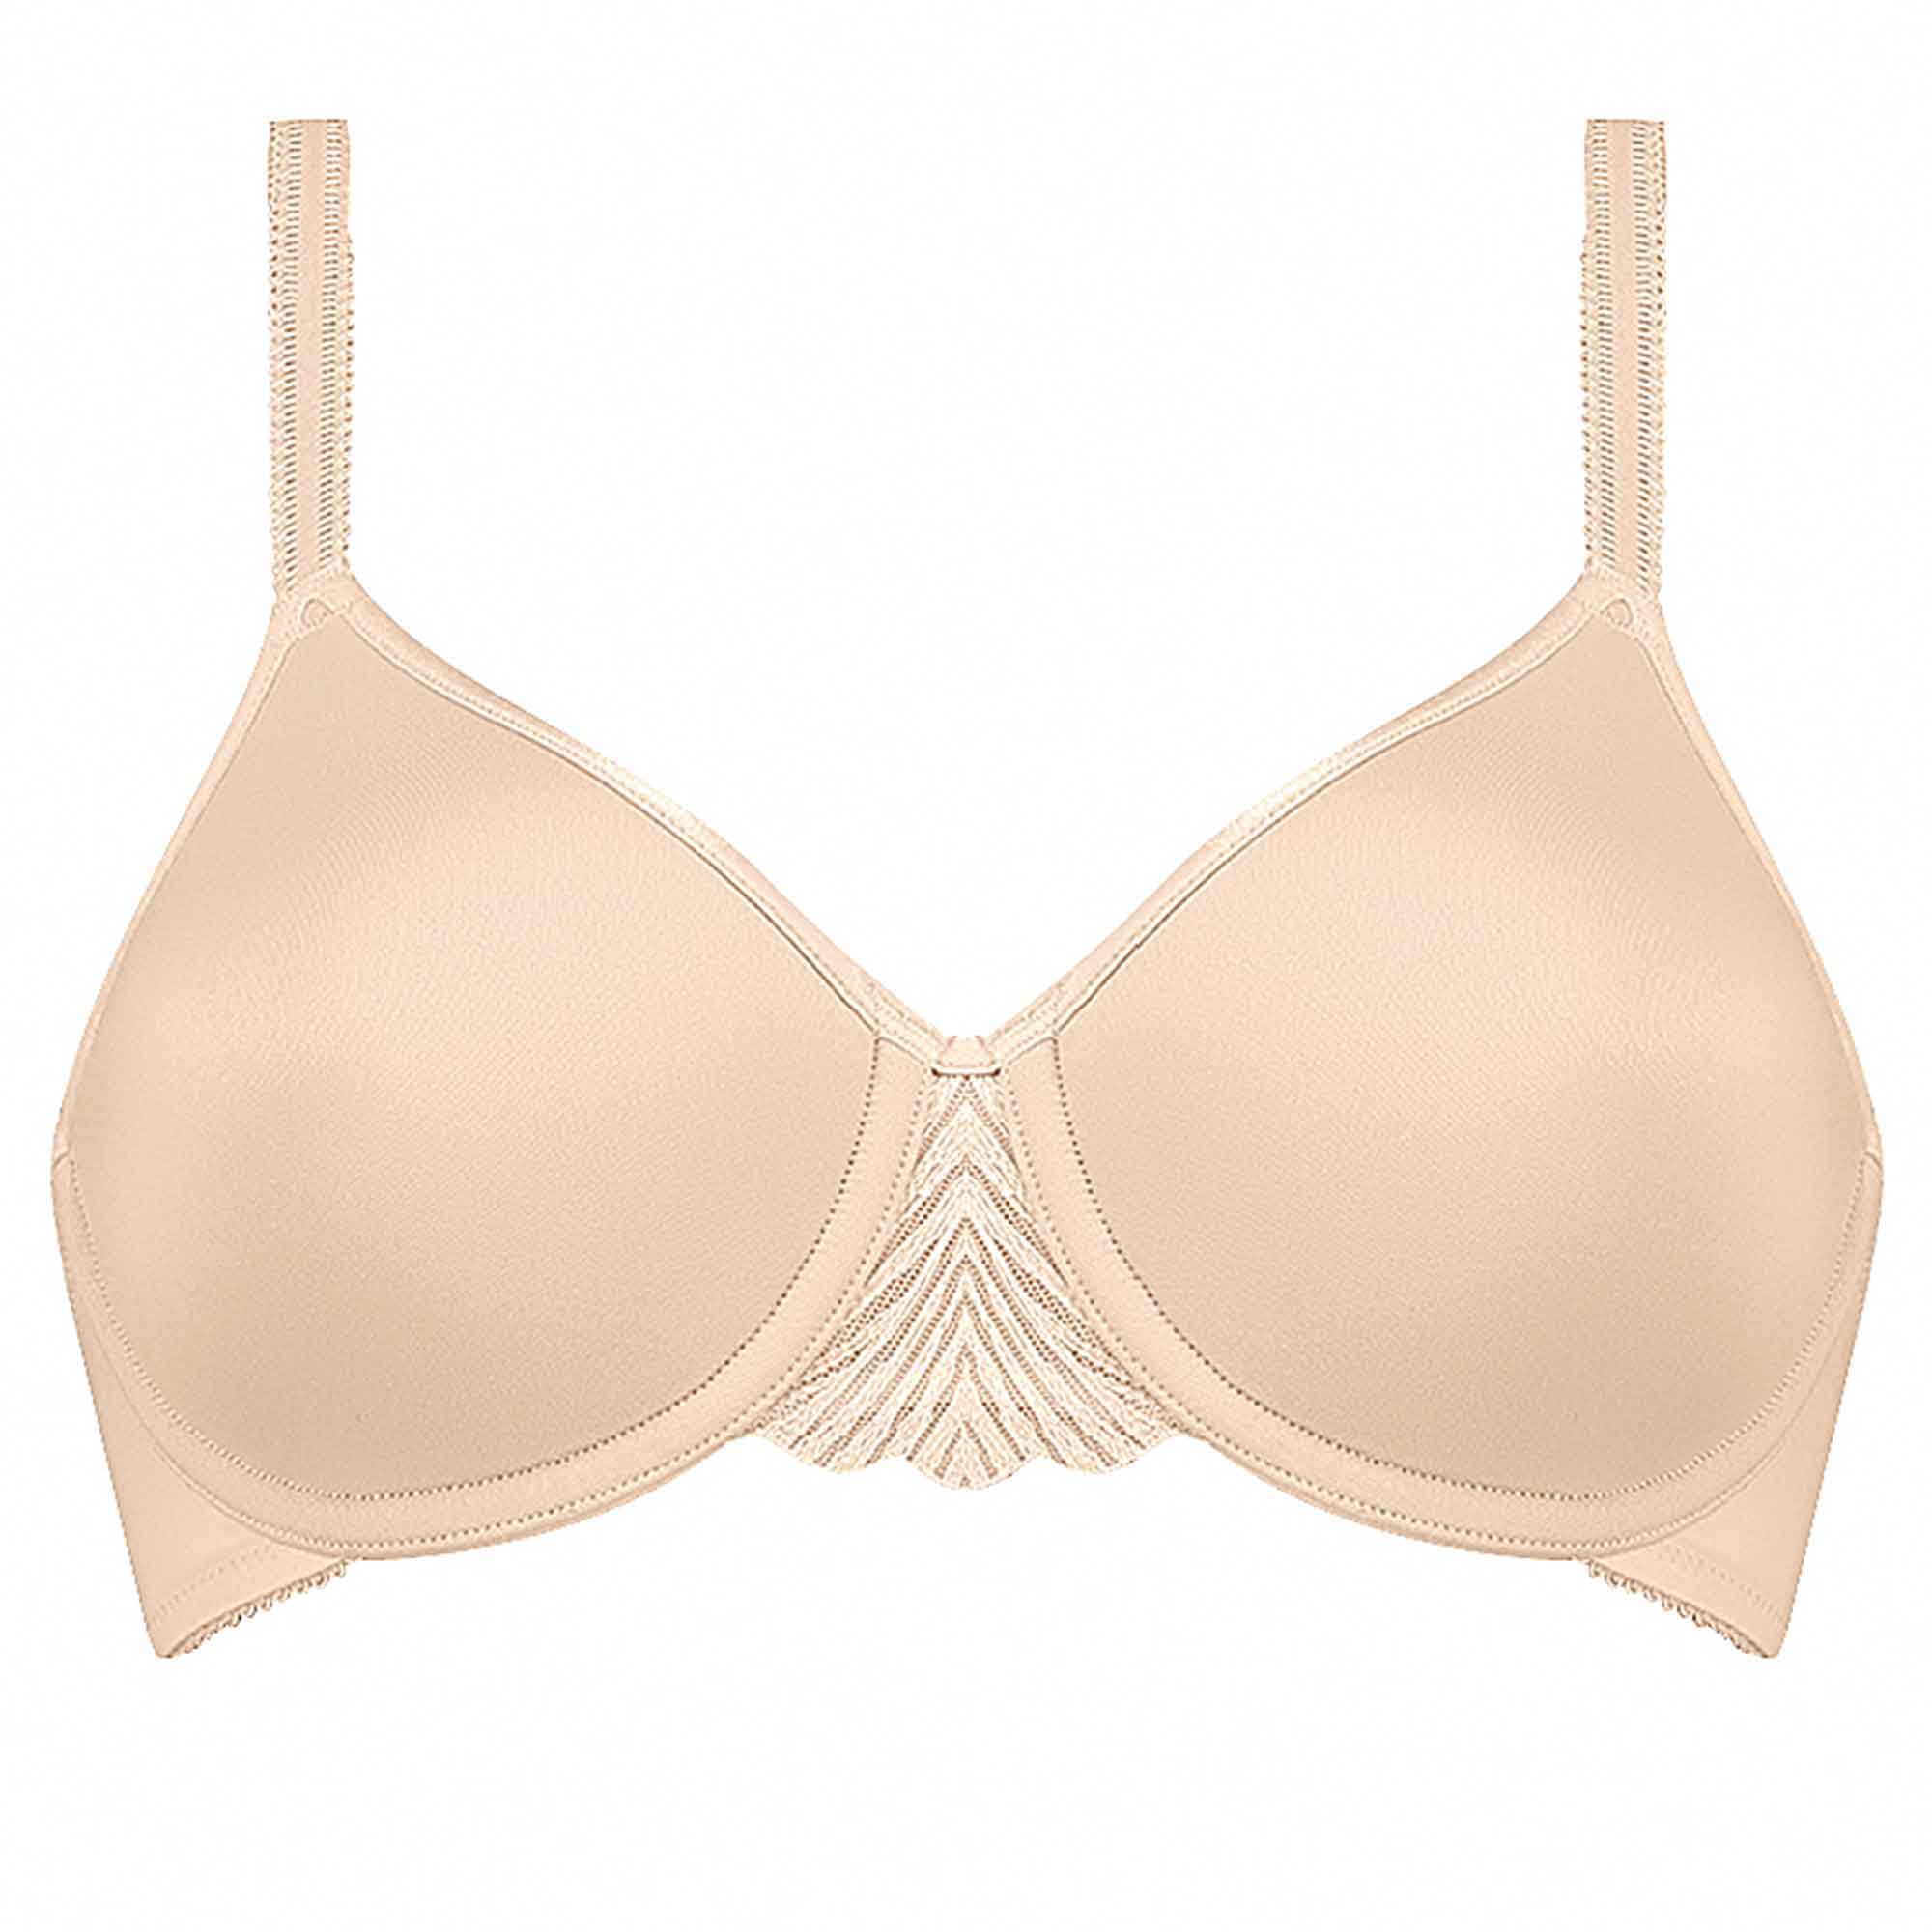 Bh My Perfect Shaper WP Nude Beige